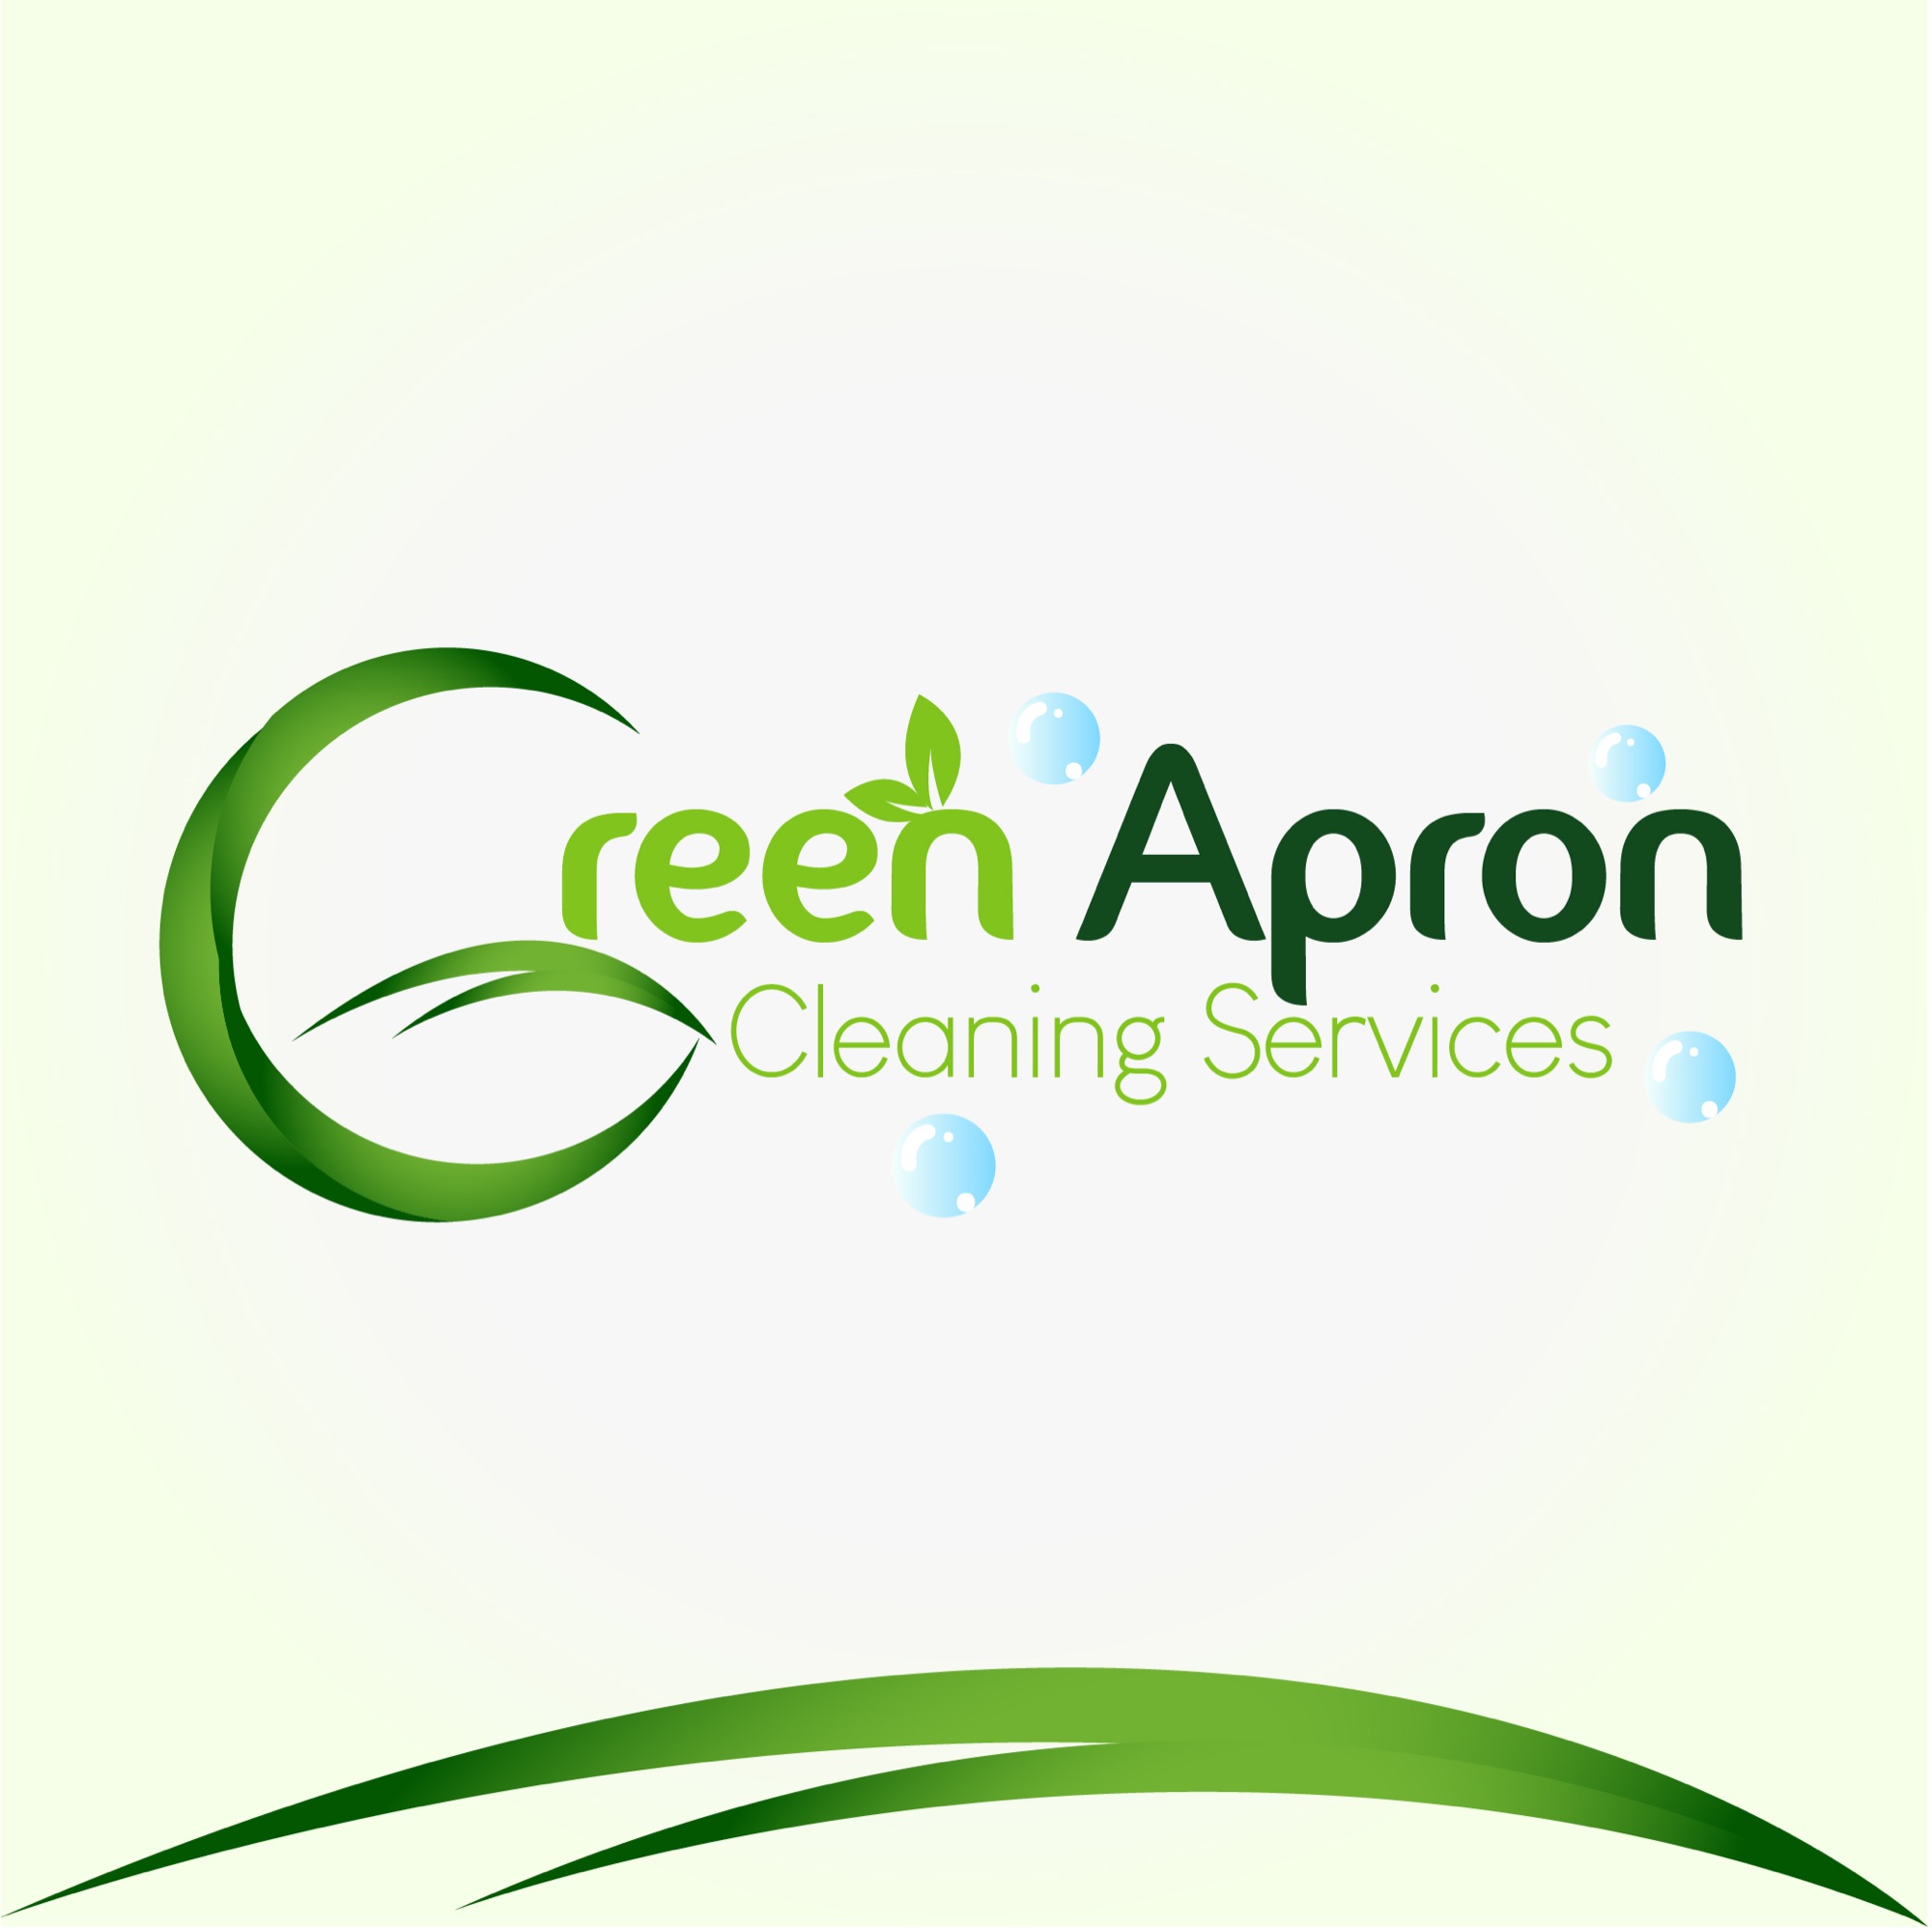 Green Apron Cleaning Services Logo